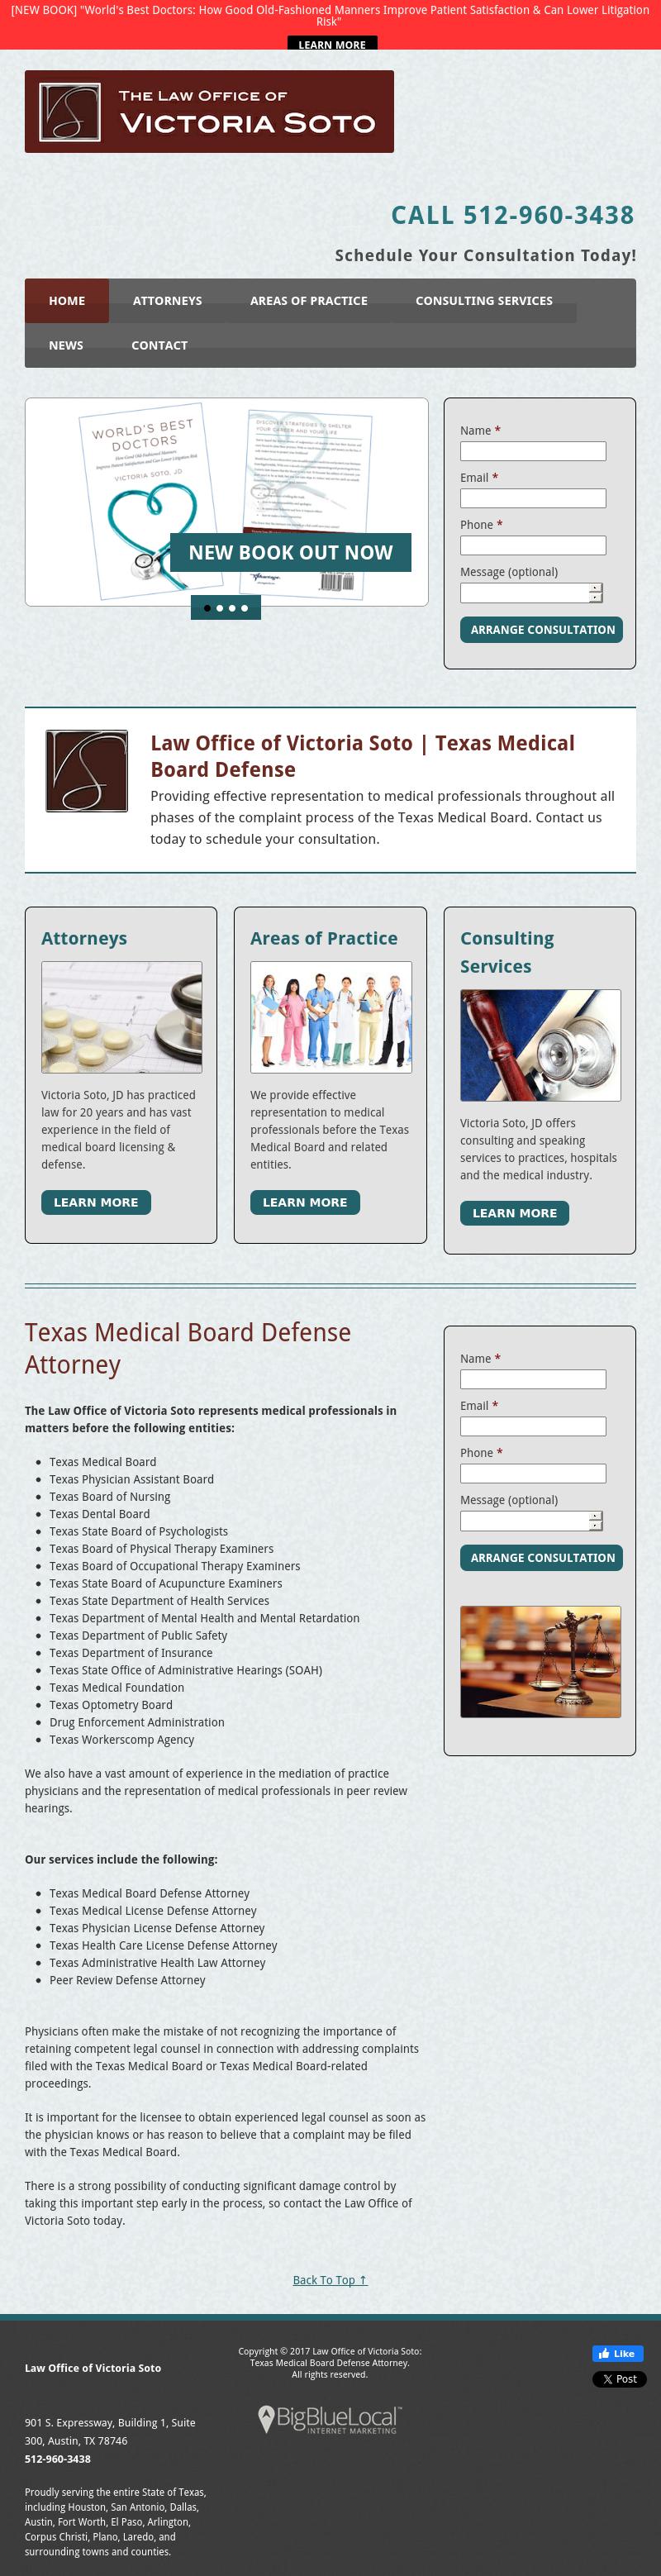 Victoria Soto - Georgetown TX Lawyers